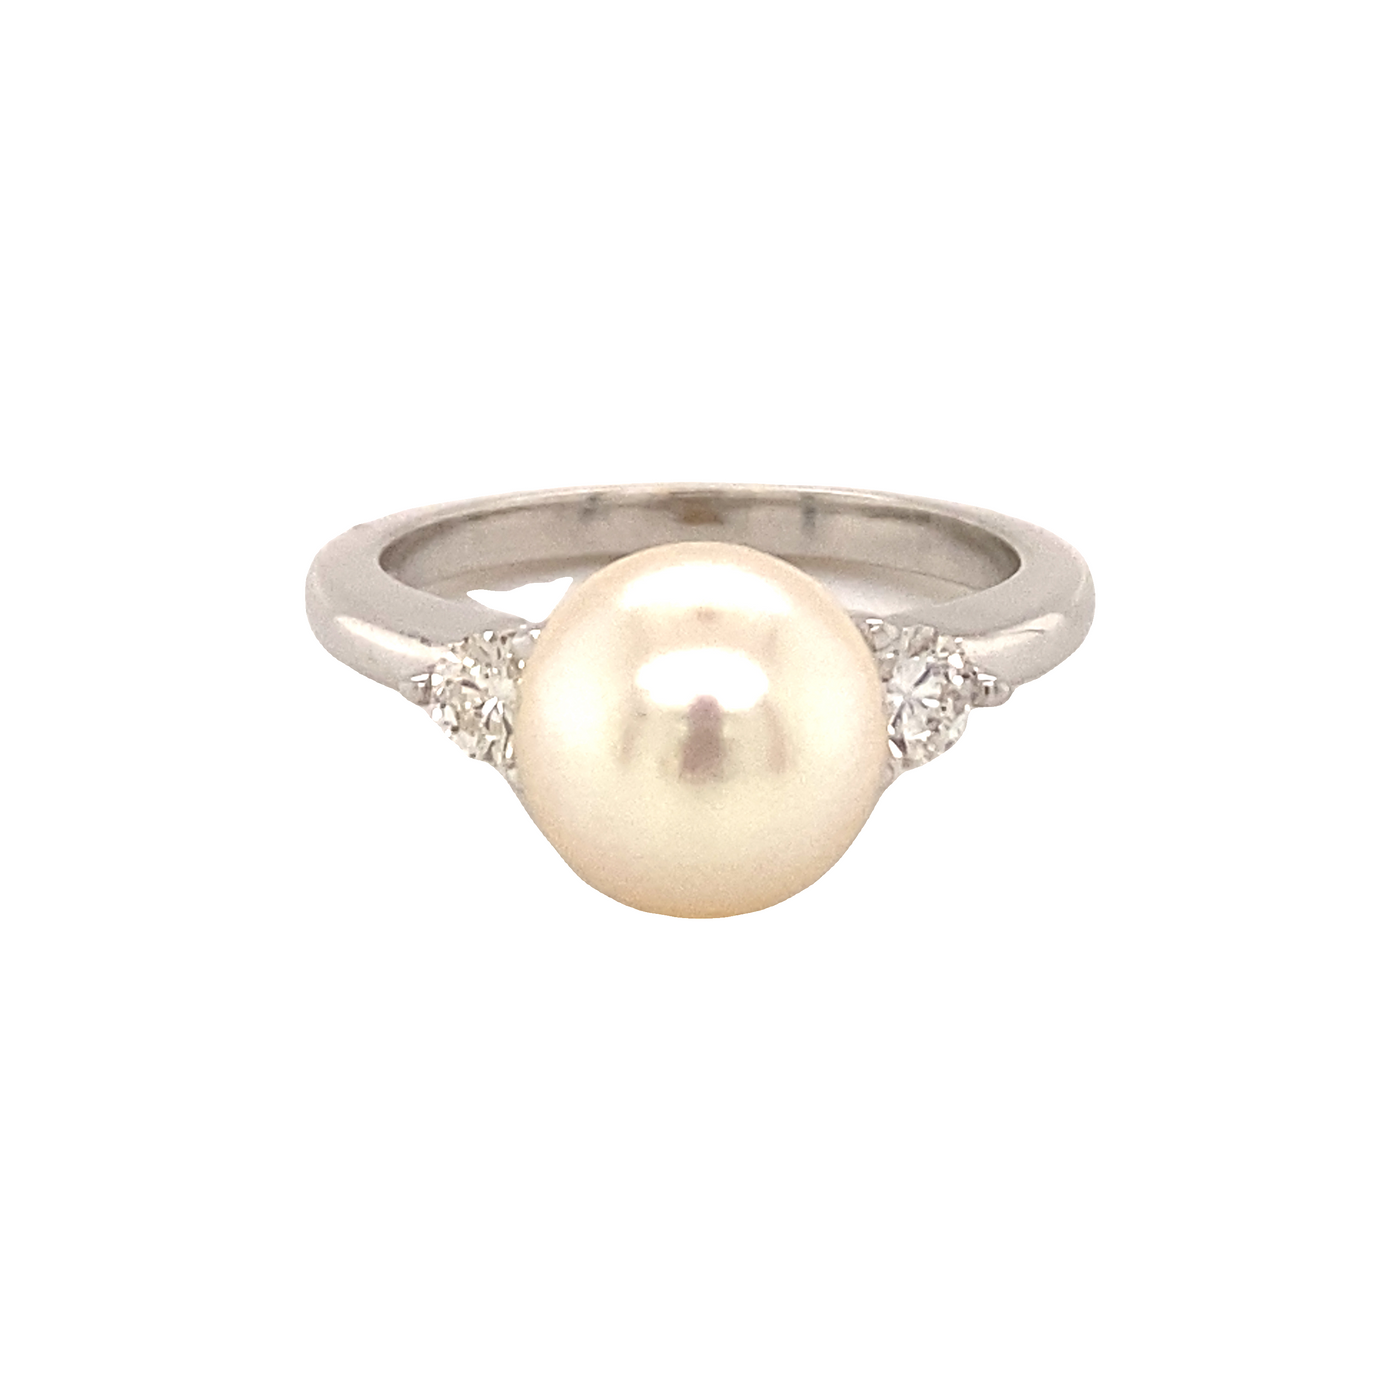 Beeghly & Co. 14 Karat Pearl and Diamond Ring